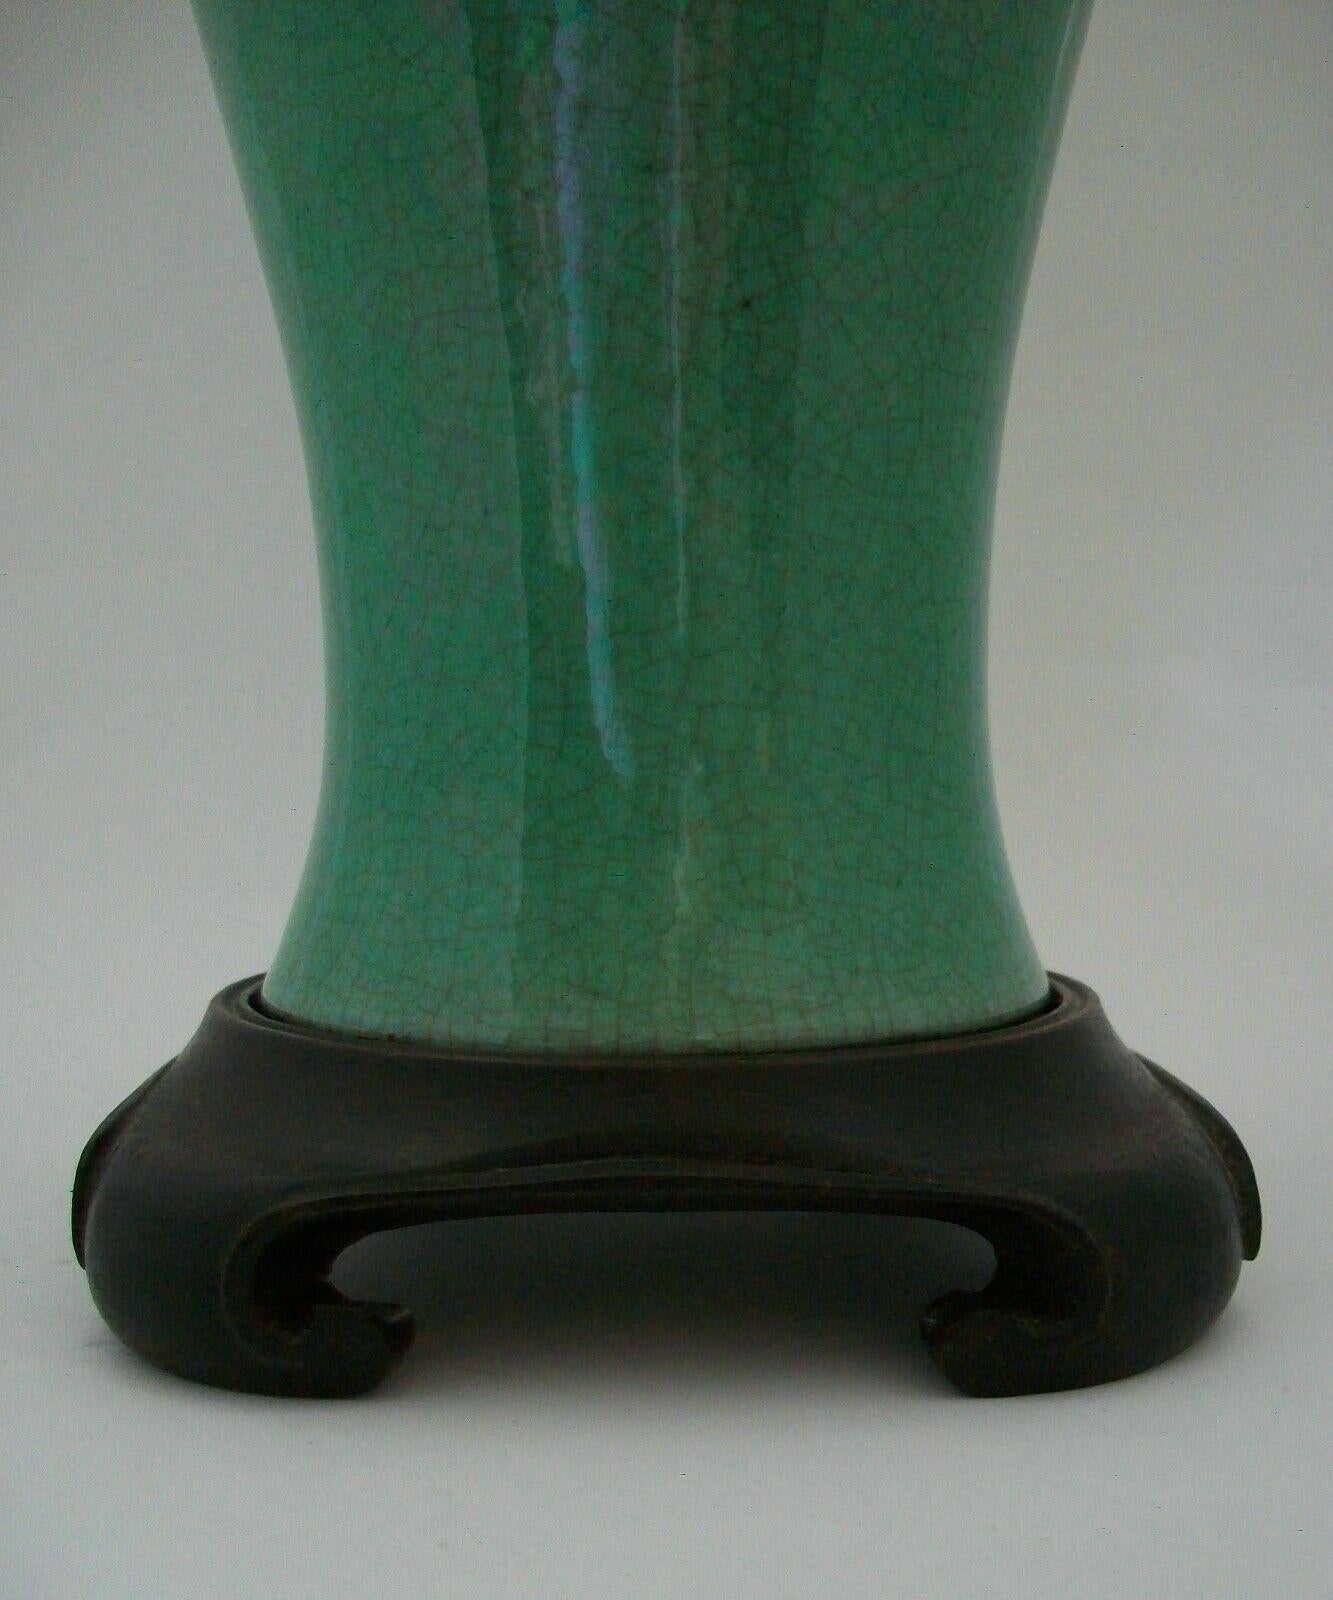 Qing Kangxi Apple Green Crackle Glaze Baluster Vase/Lamp, China, Early 18th Century For Sale